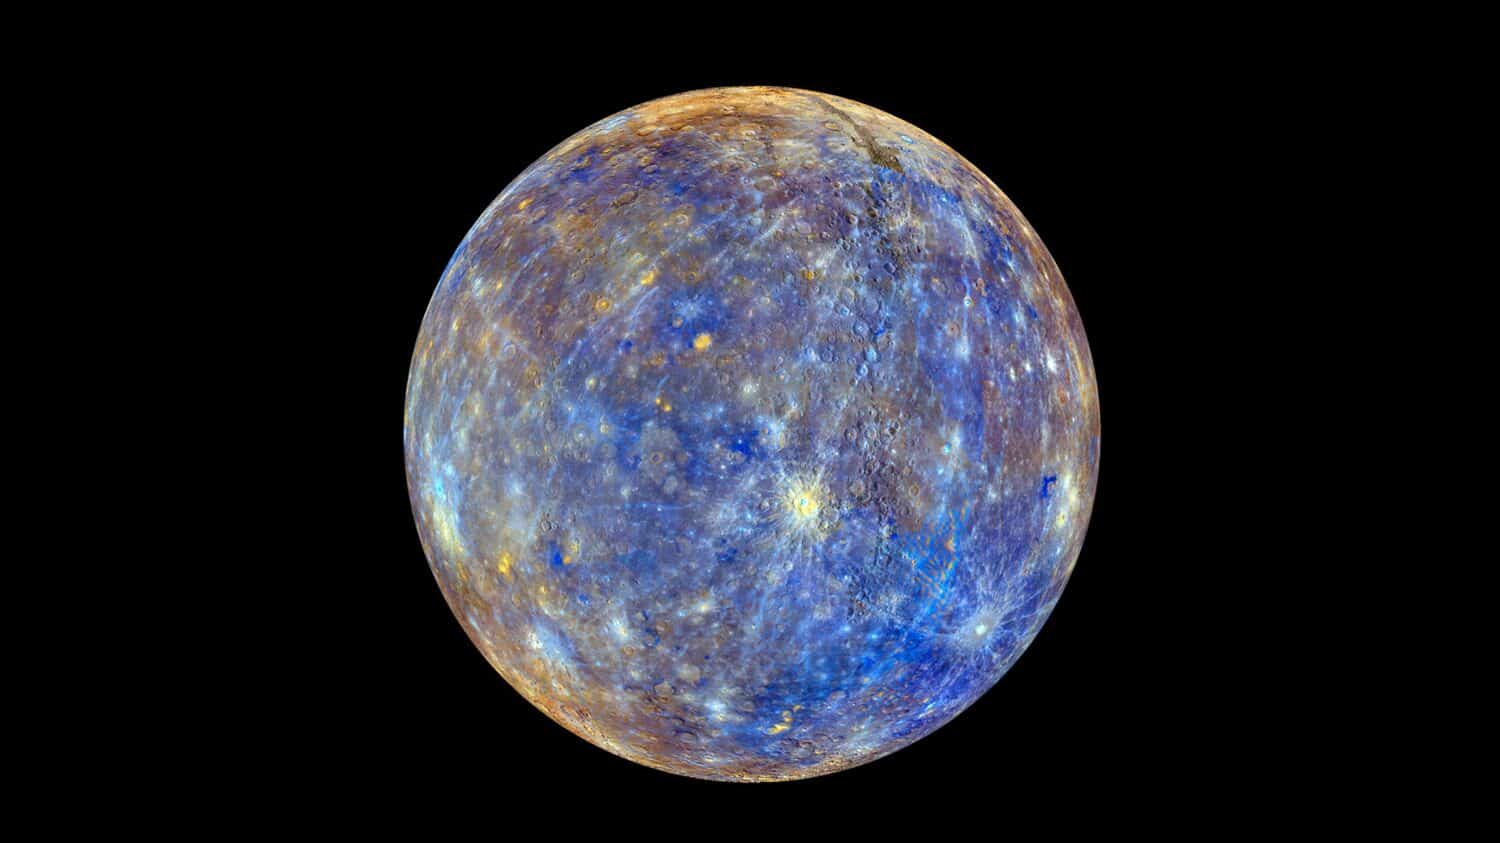 The Planet Mercury. Elements of this image were furnished by NASA.